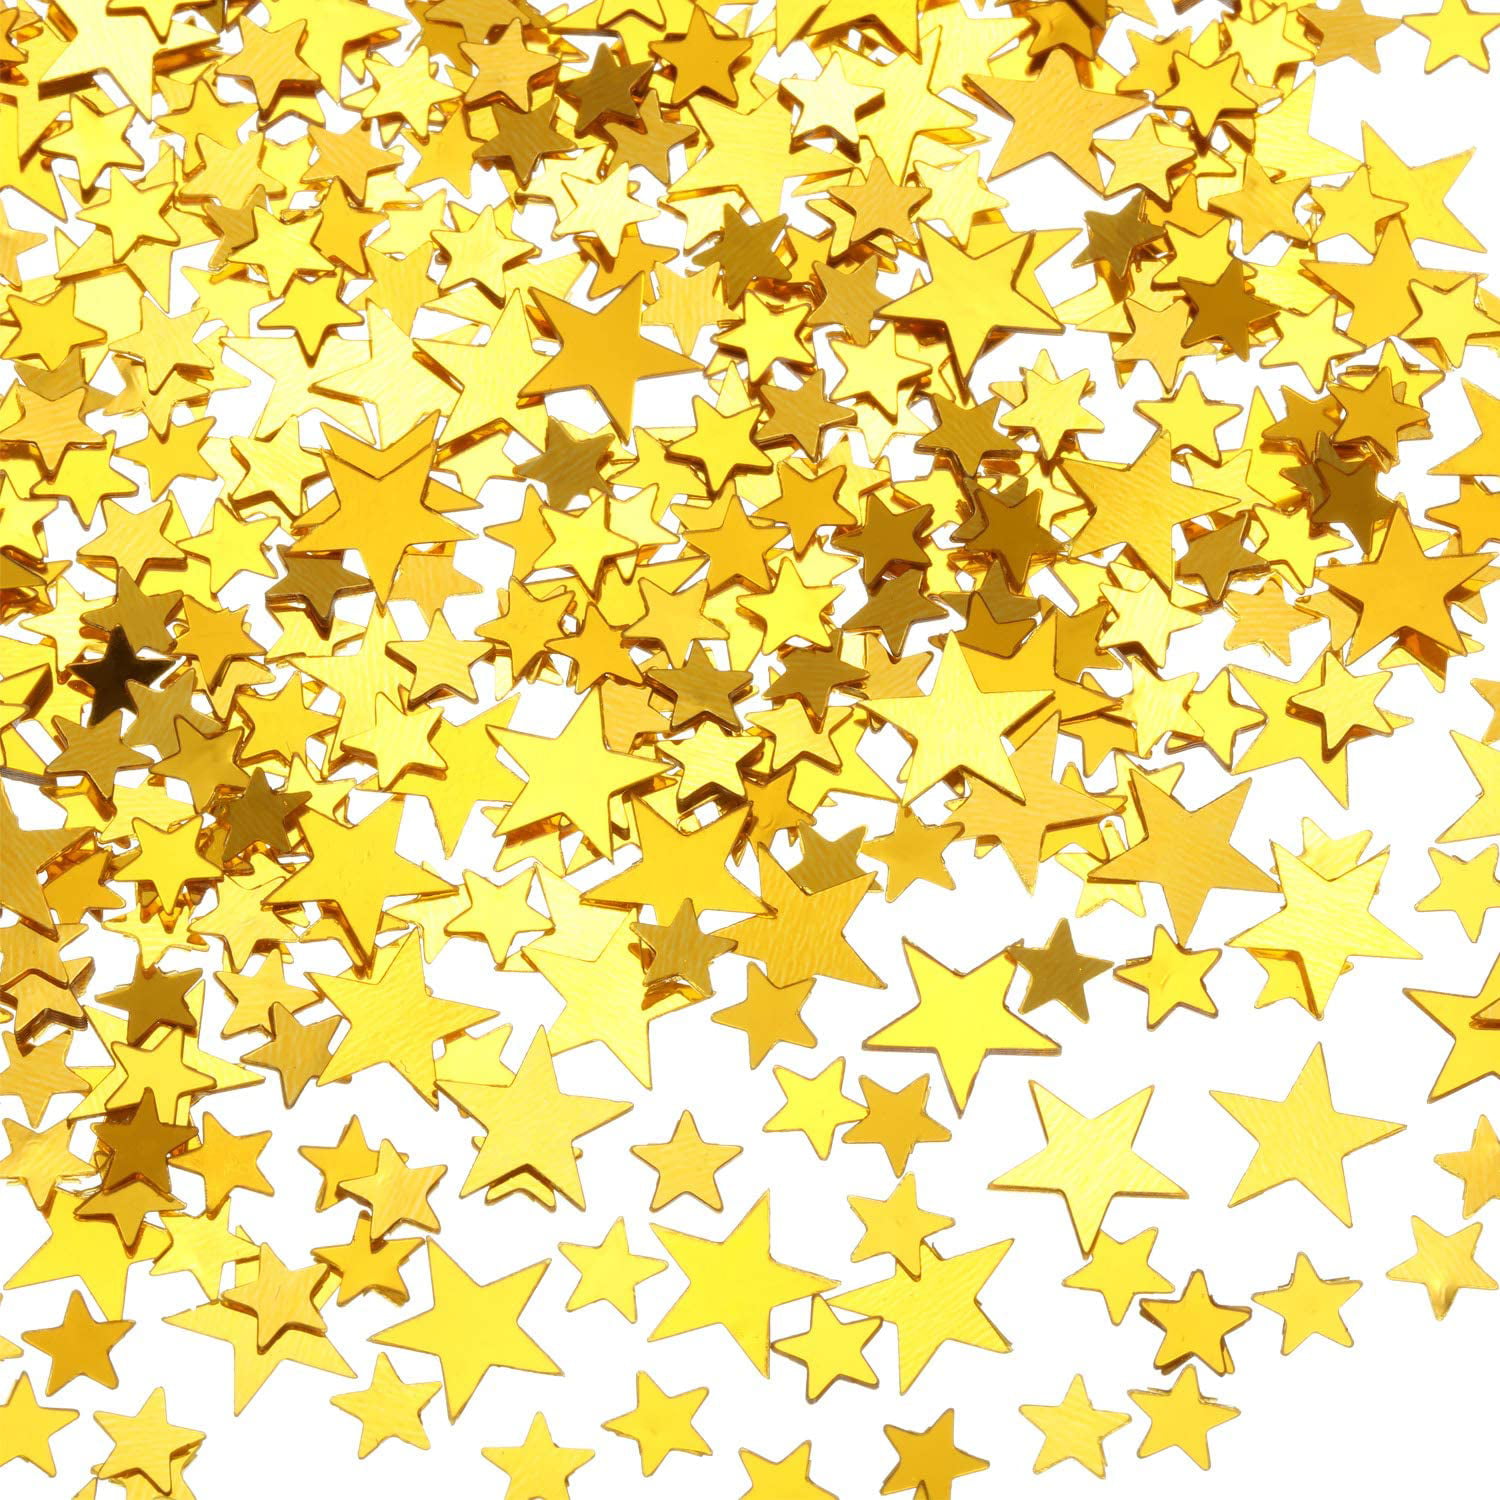 Merry Christmas Metallic STARS CONFETTI Sprinkles Scatters Table Party Deco 